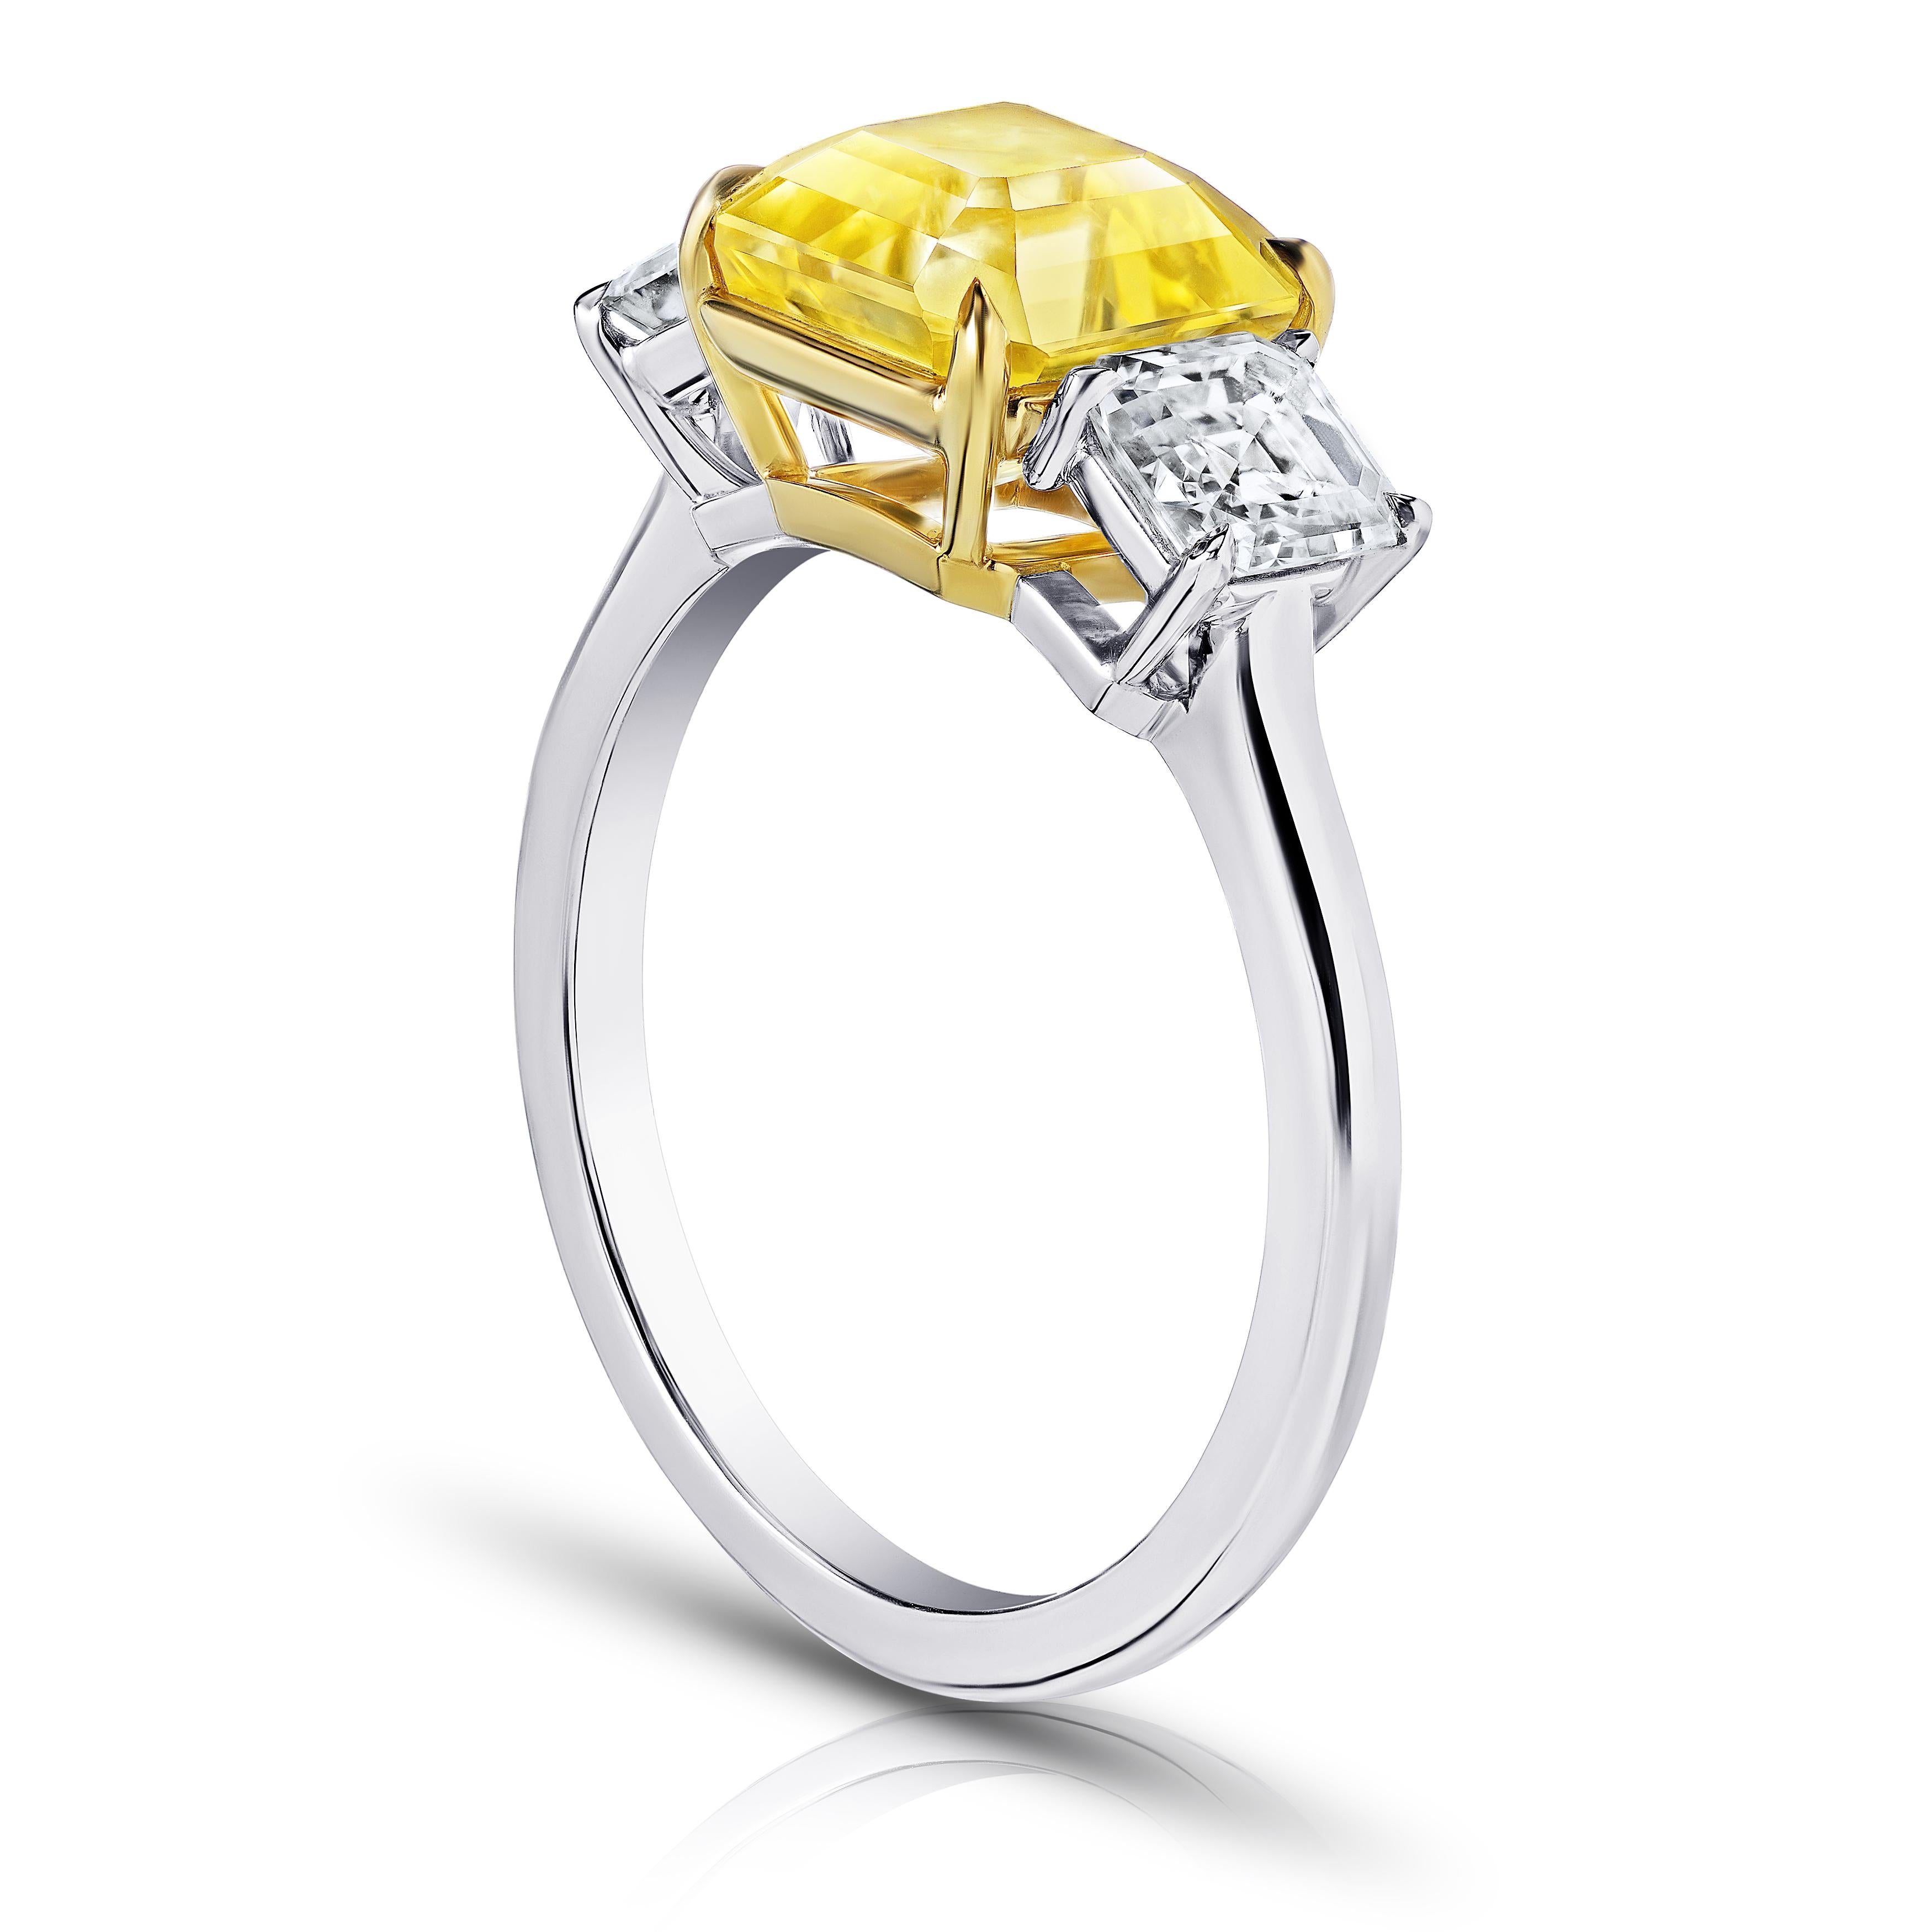 3.48 carat square emerald cut yellow sapphire with square emerald cut diamonds 1.03 carats set in a platinum with 18k yellow gold ring